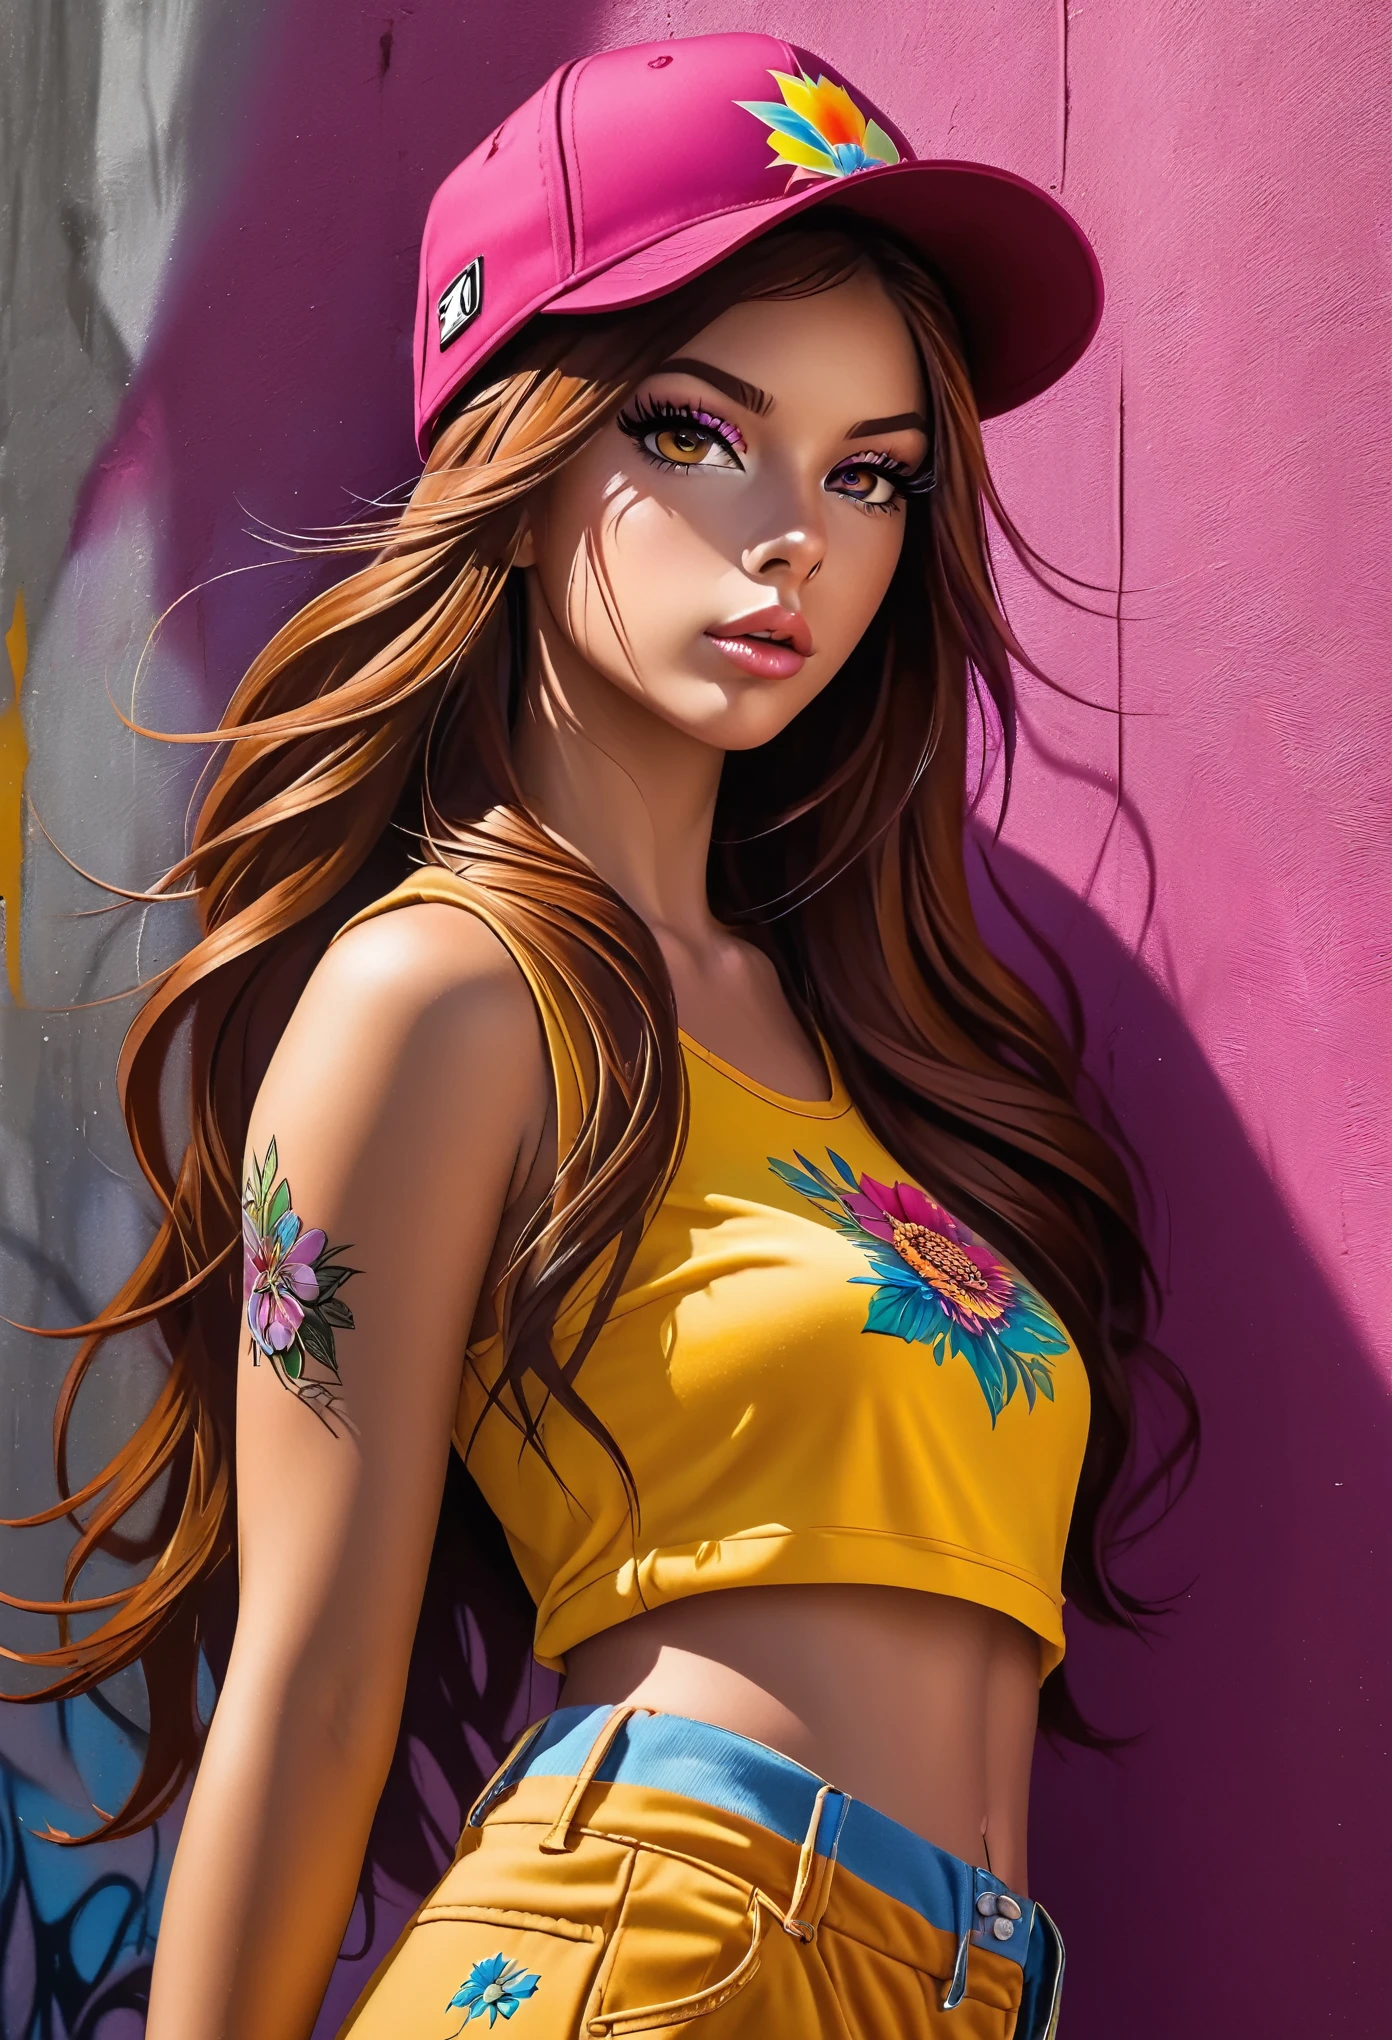 ((long shot, whole body: 1.6)), cian:1.4, brown:1.2, purpura:1.2, yellow:1.4, magenta:1.6, (rapper girl with long brown hair:1.6, beautiful modern cut with peaked hat:1.5 , very detailed eyes and body and beautiful loose clothing, Wide pant:1.6), tattoos, (walls with graffiti: 1.2), flower, leaves, born in the fog, lines, leaning against the wall with a spray paint in her hand, well defined light and shadows, action pose, 32k.